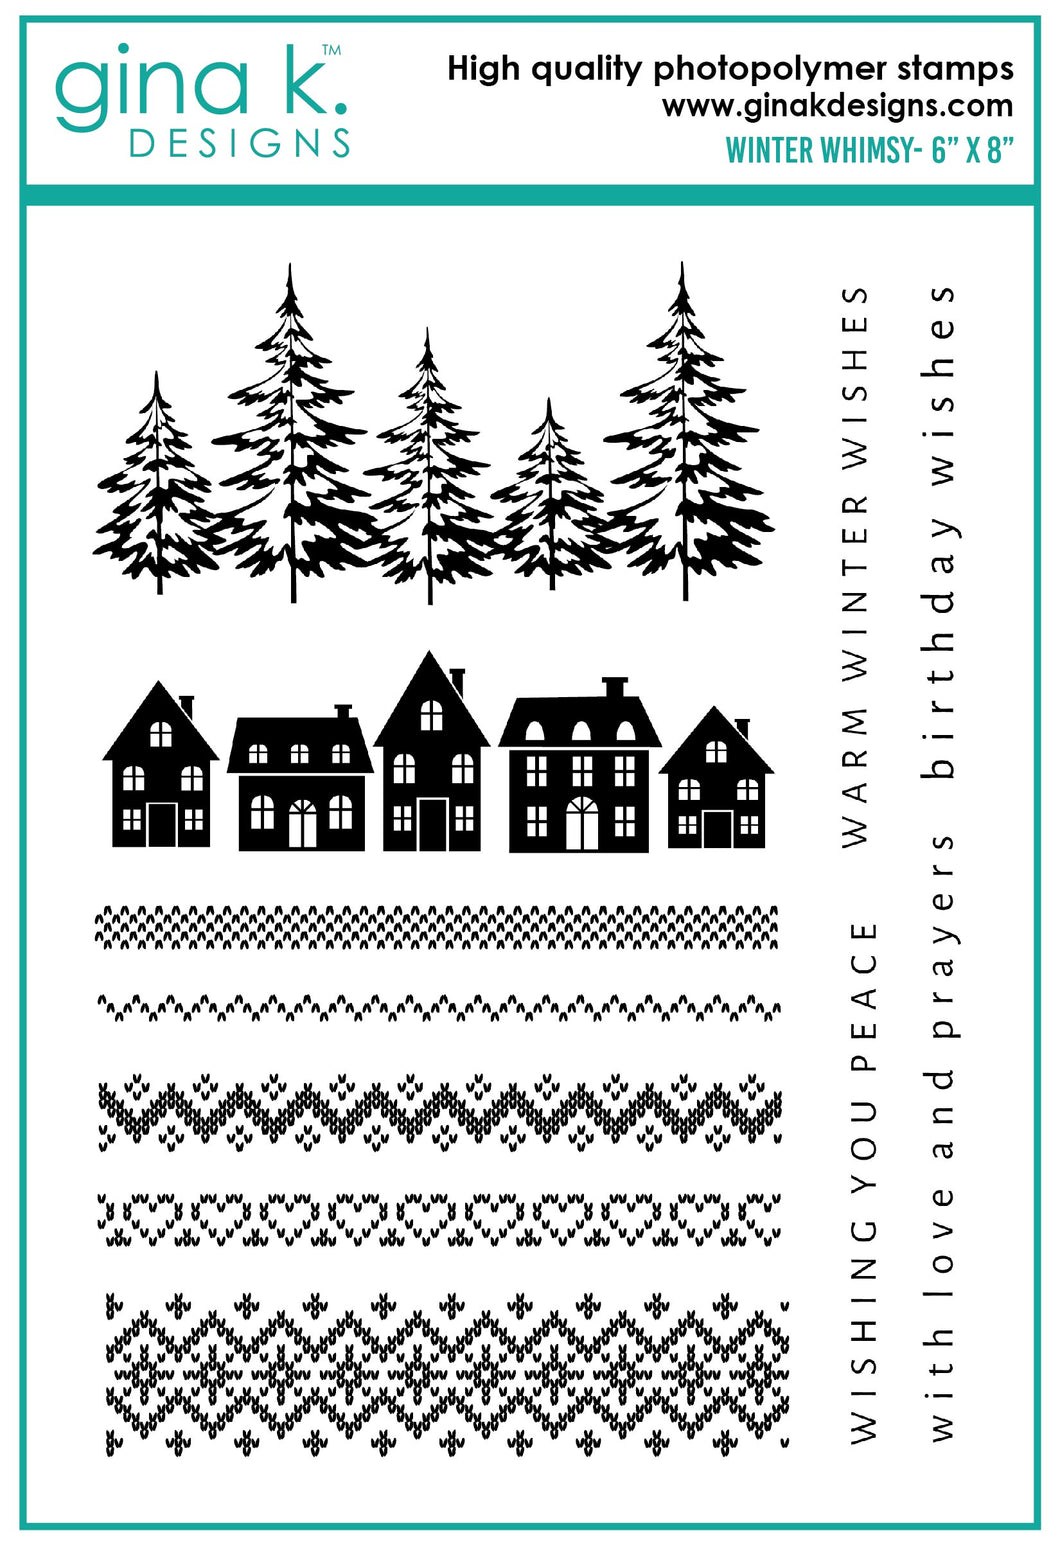 Gina K. Designs - Stamp - Winter Whimsy. Winter Whimsy is a stamp set by Gina K Designs. This set is made of premium clear photopolymer and measures 6